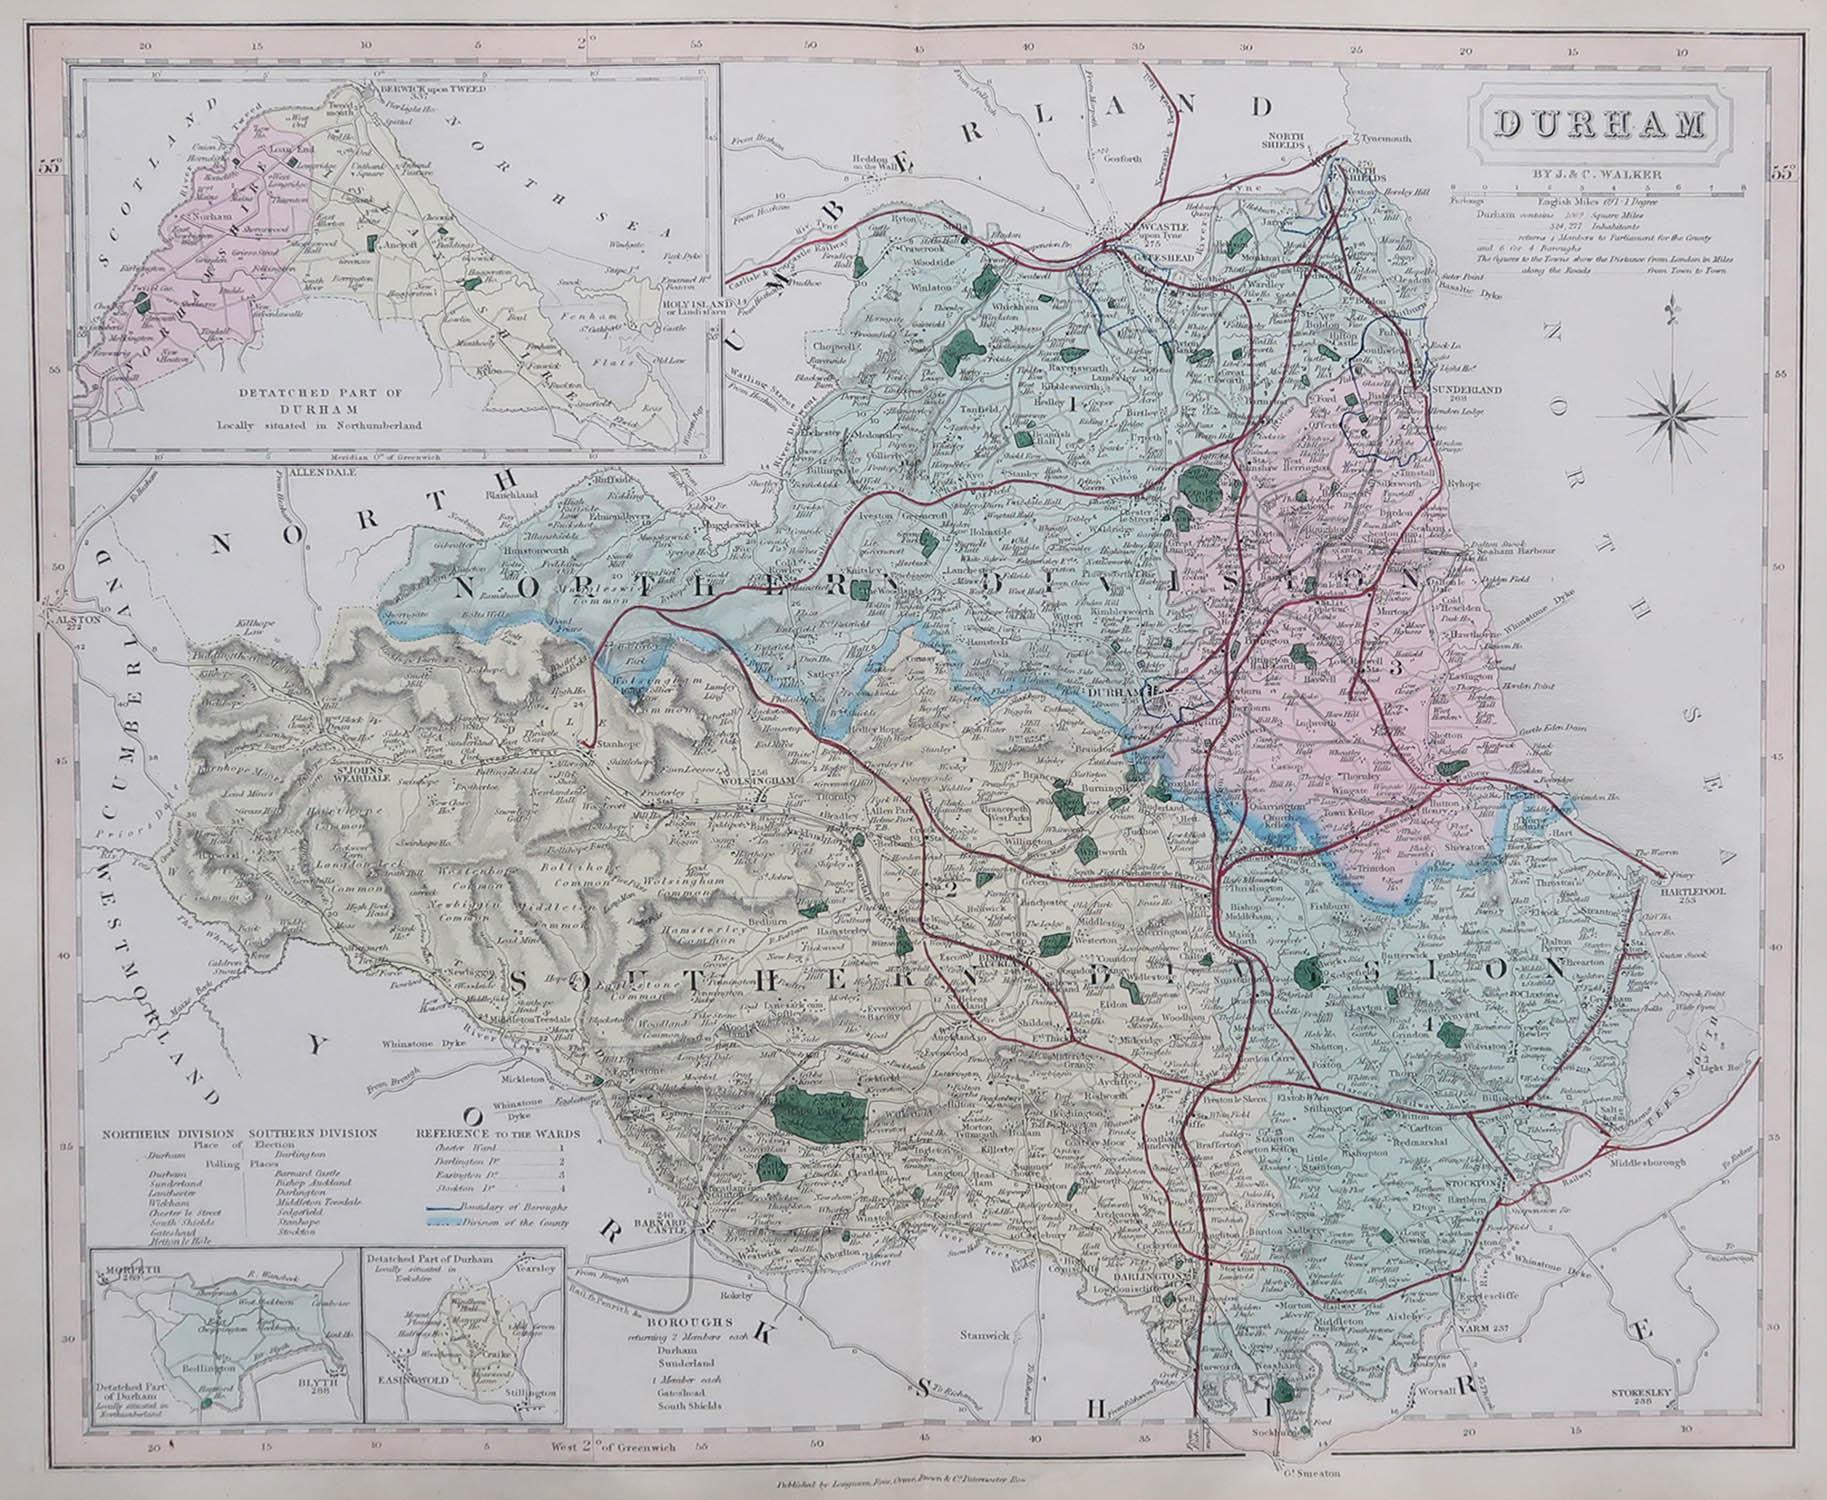 Great map of Durham

Original colour

By J & C Walker

Published by Longman, Rees, Orme, Brown & Co. 1851

Unframed.




